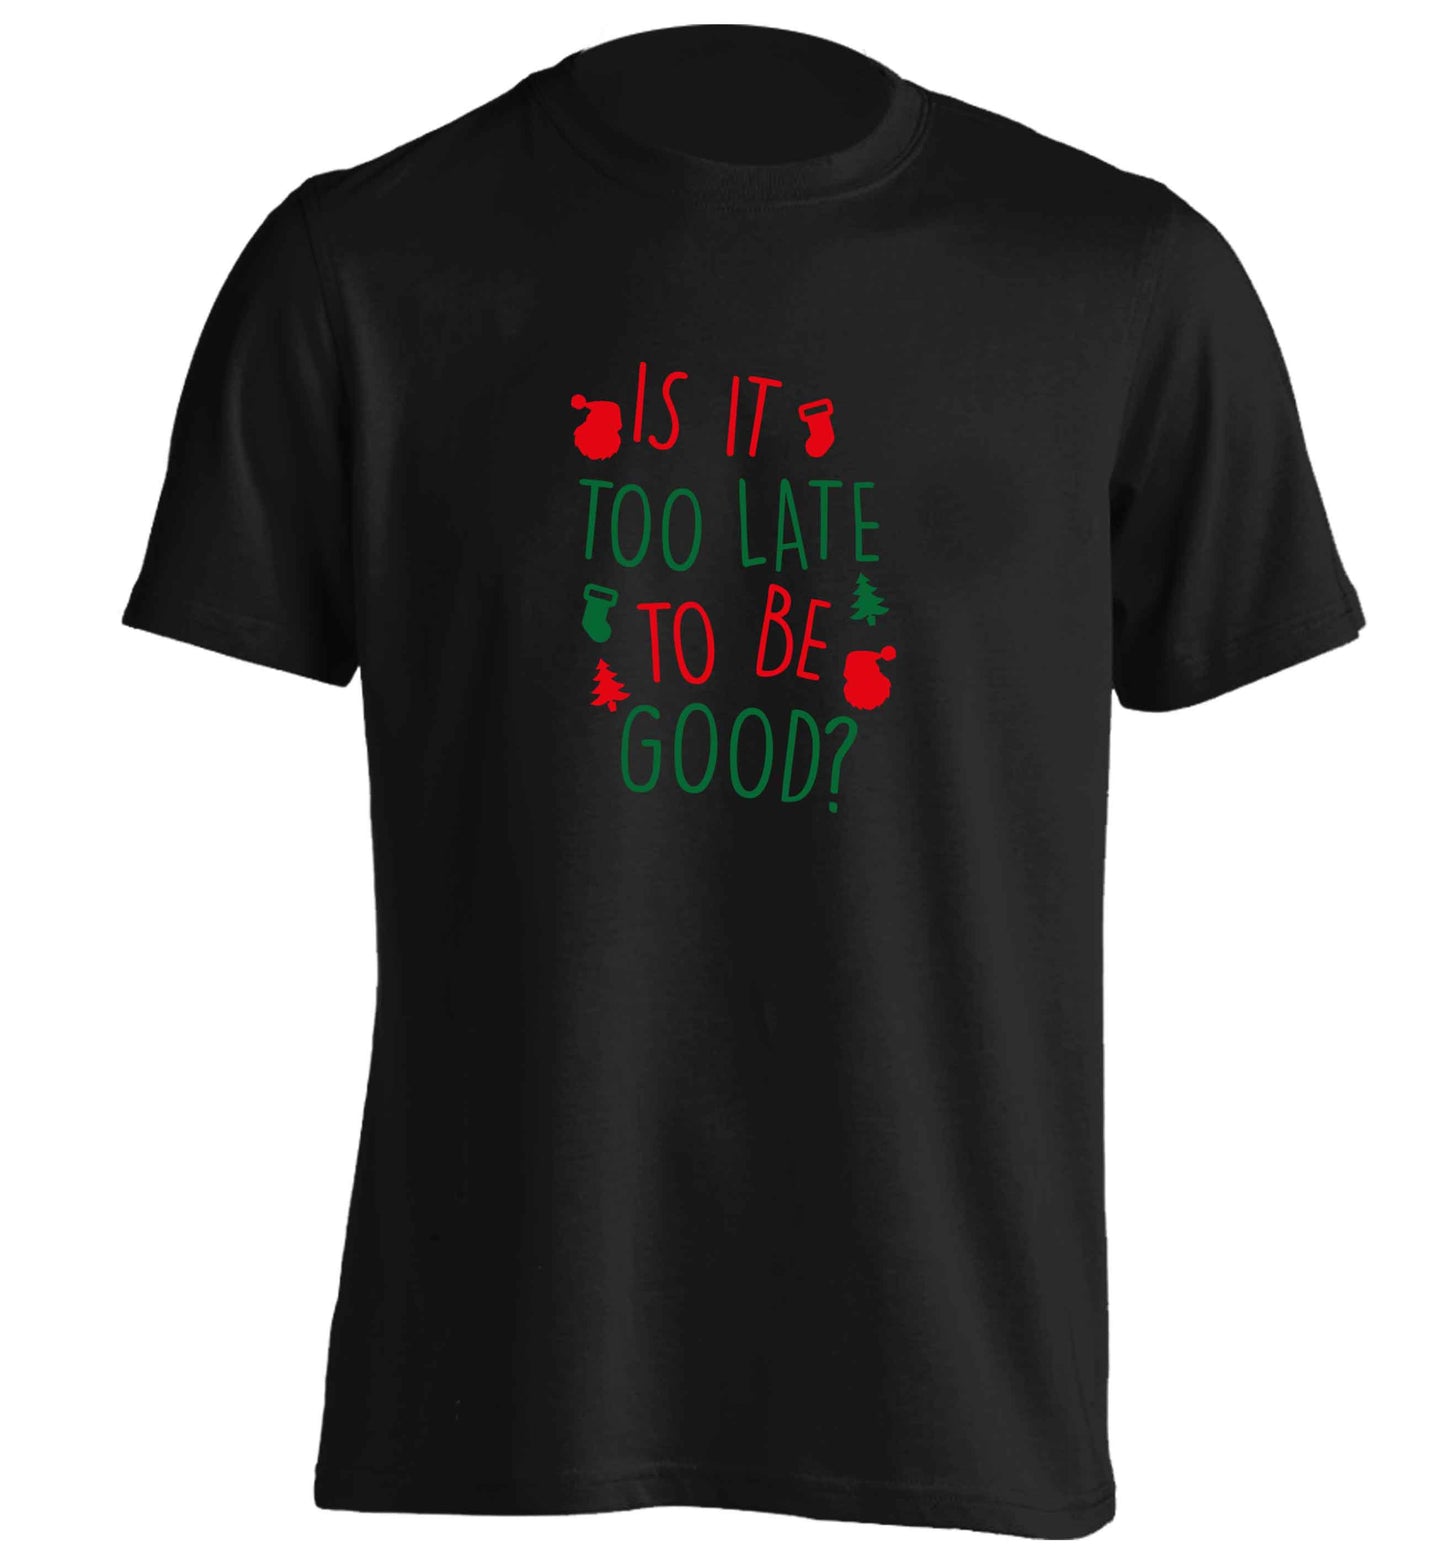 Too Late to be Good adults unisex black Tshirt 2XL